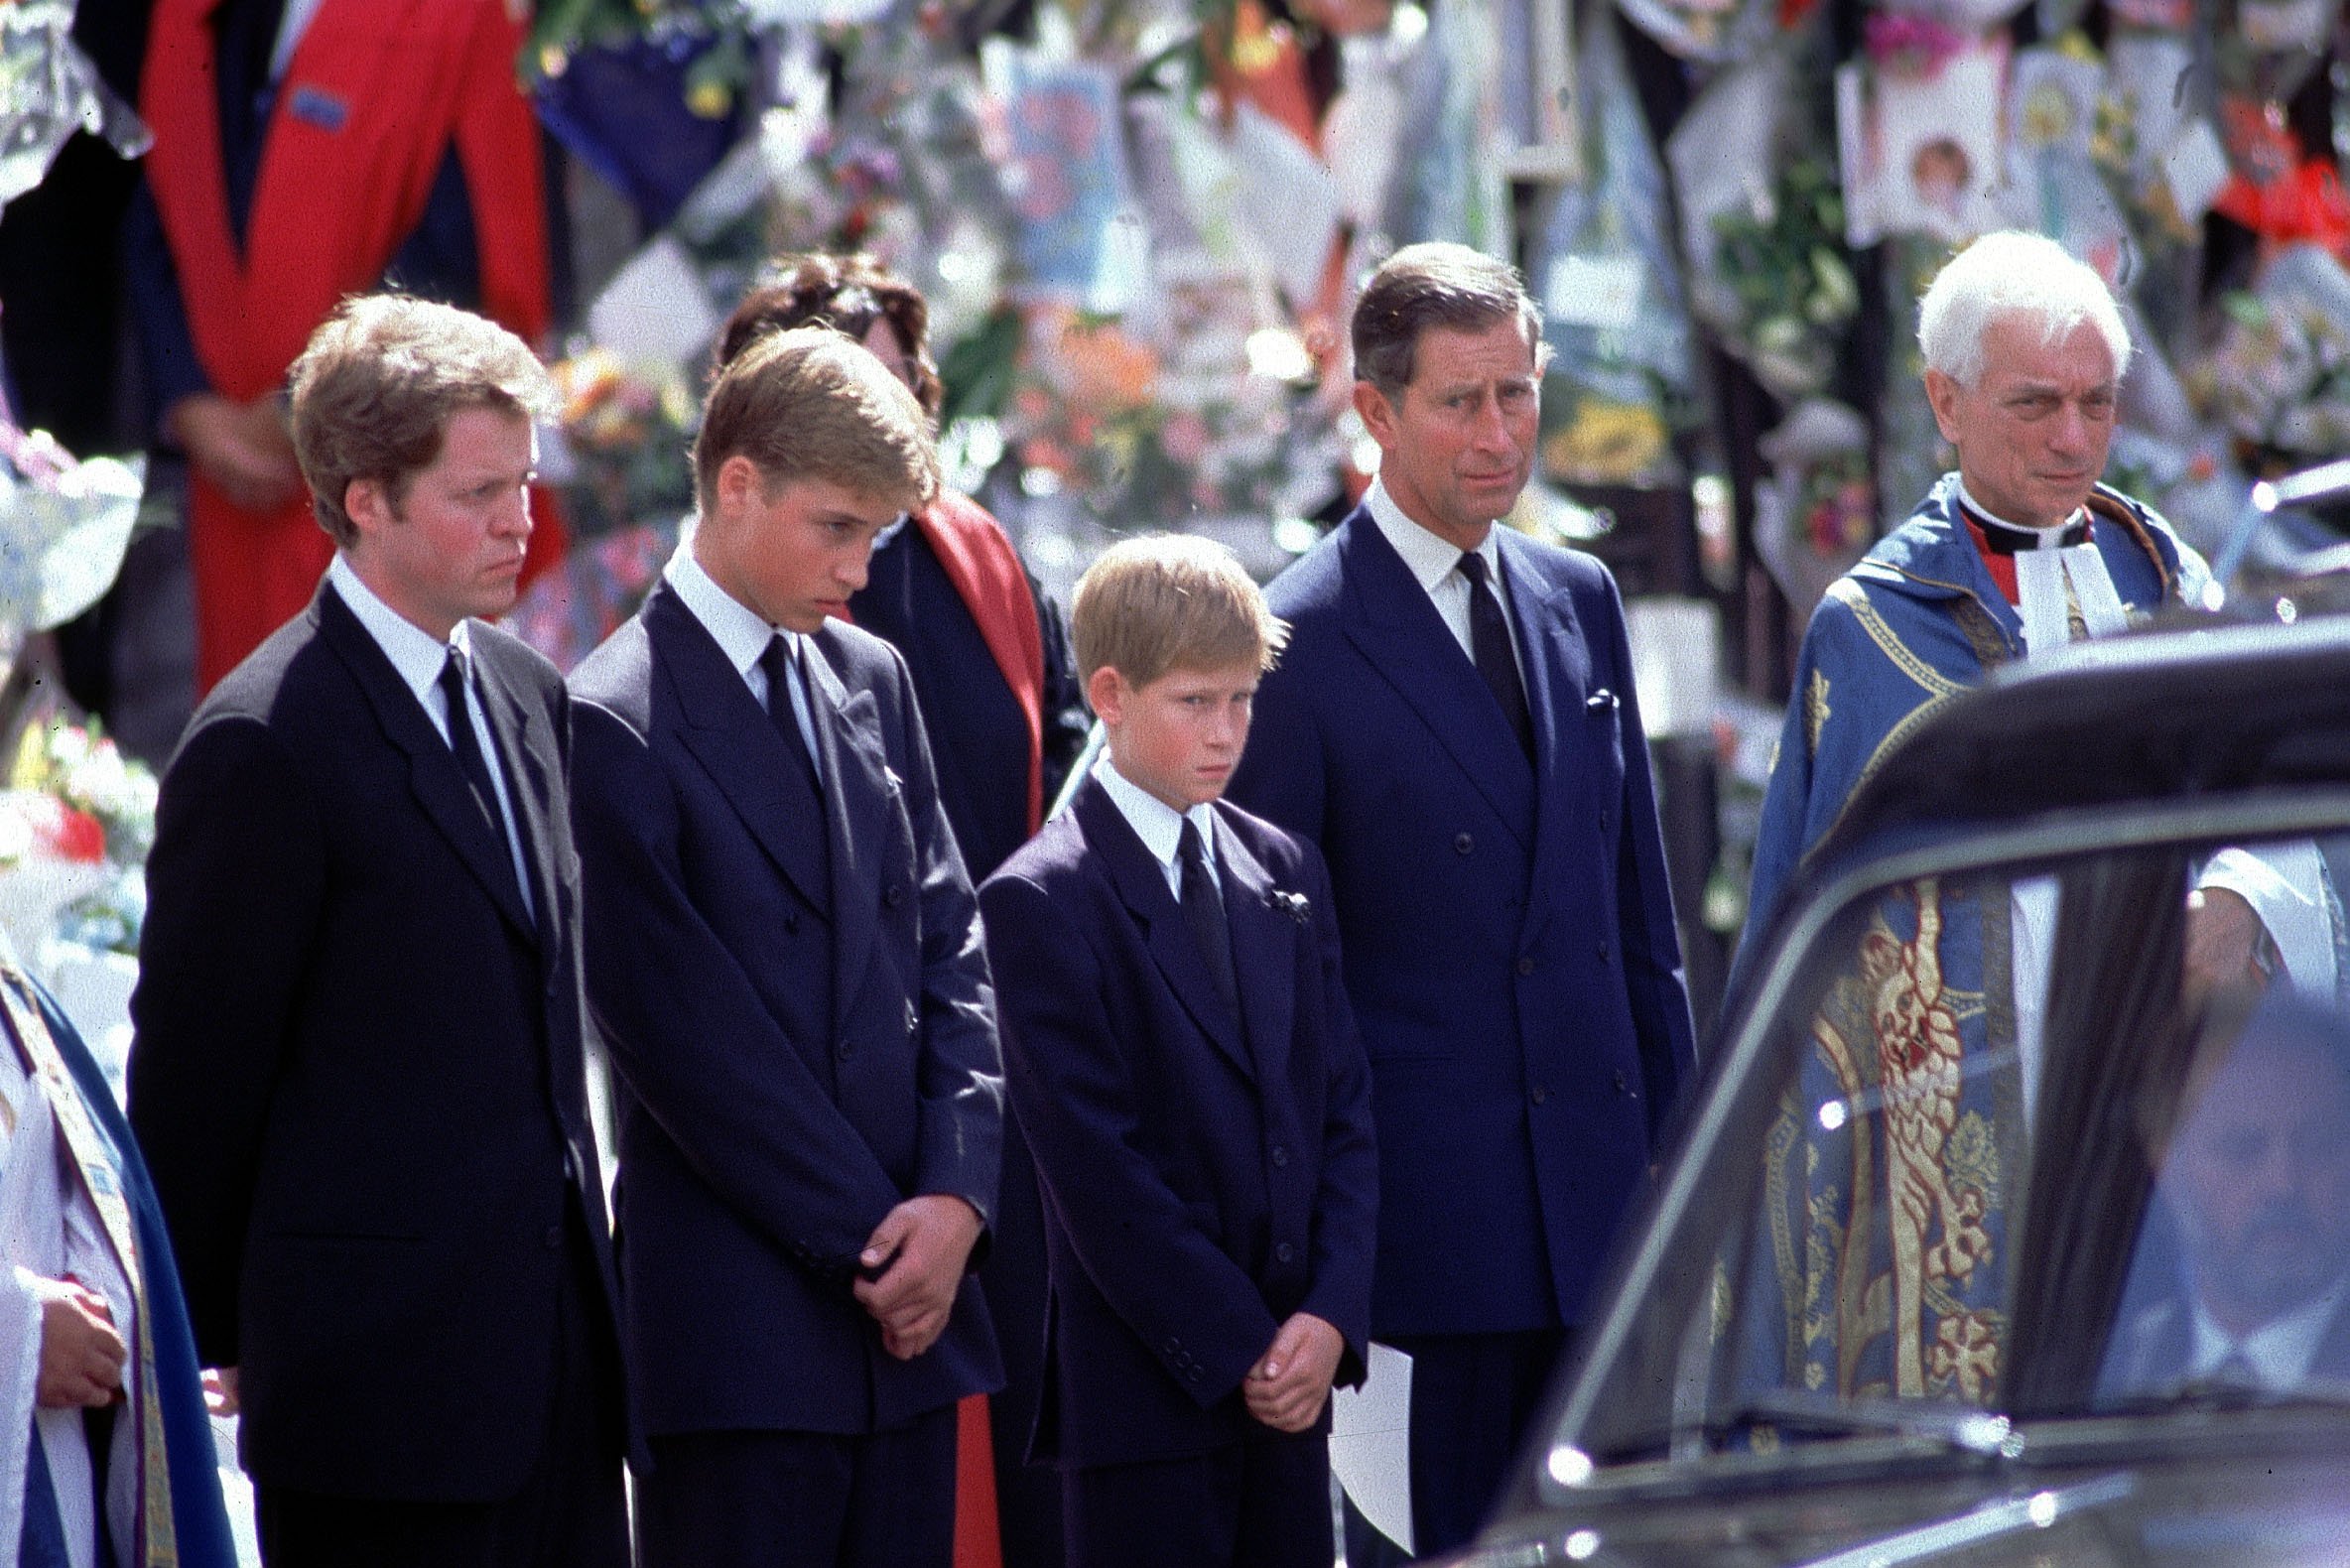 (L to R) Earl Spencer, Prince William. Prince Harry,and Prince Charles stand alongside the hearse containing the coffin of Diana